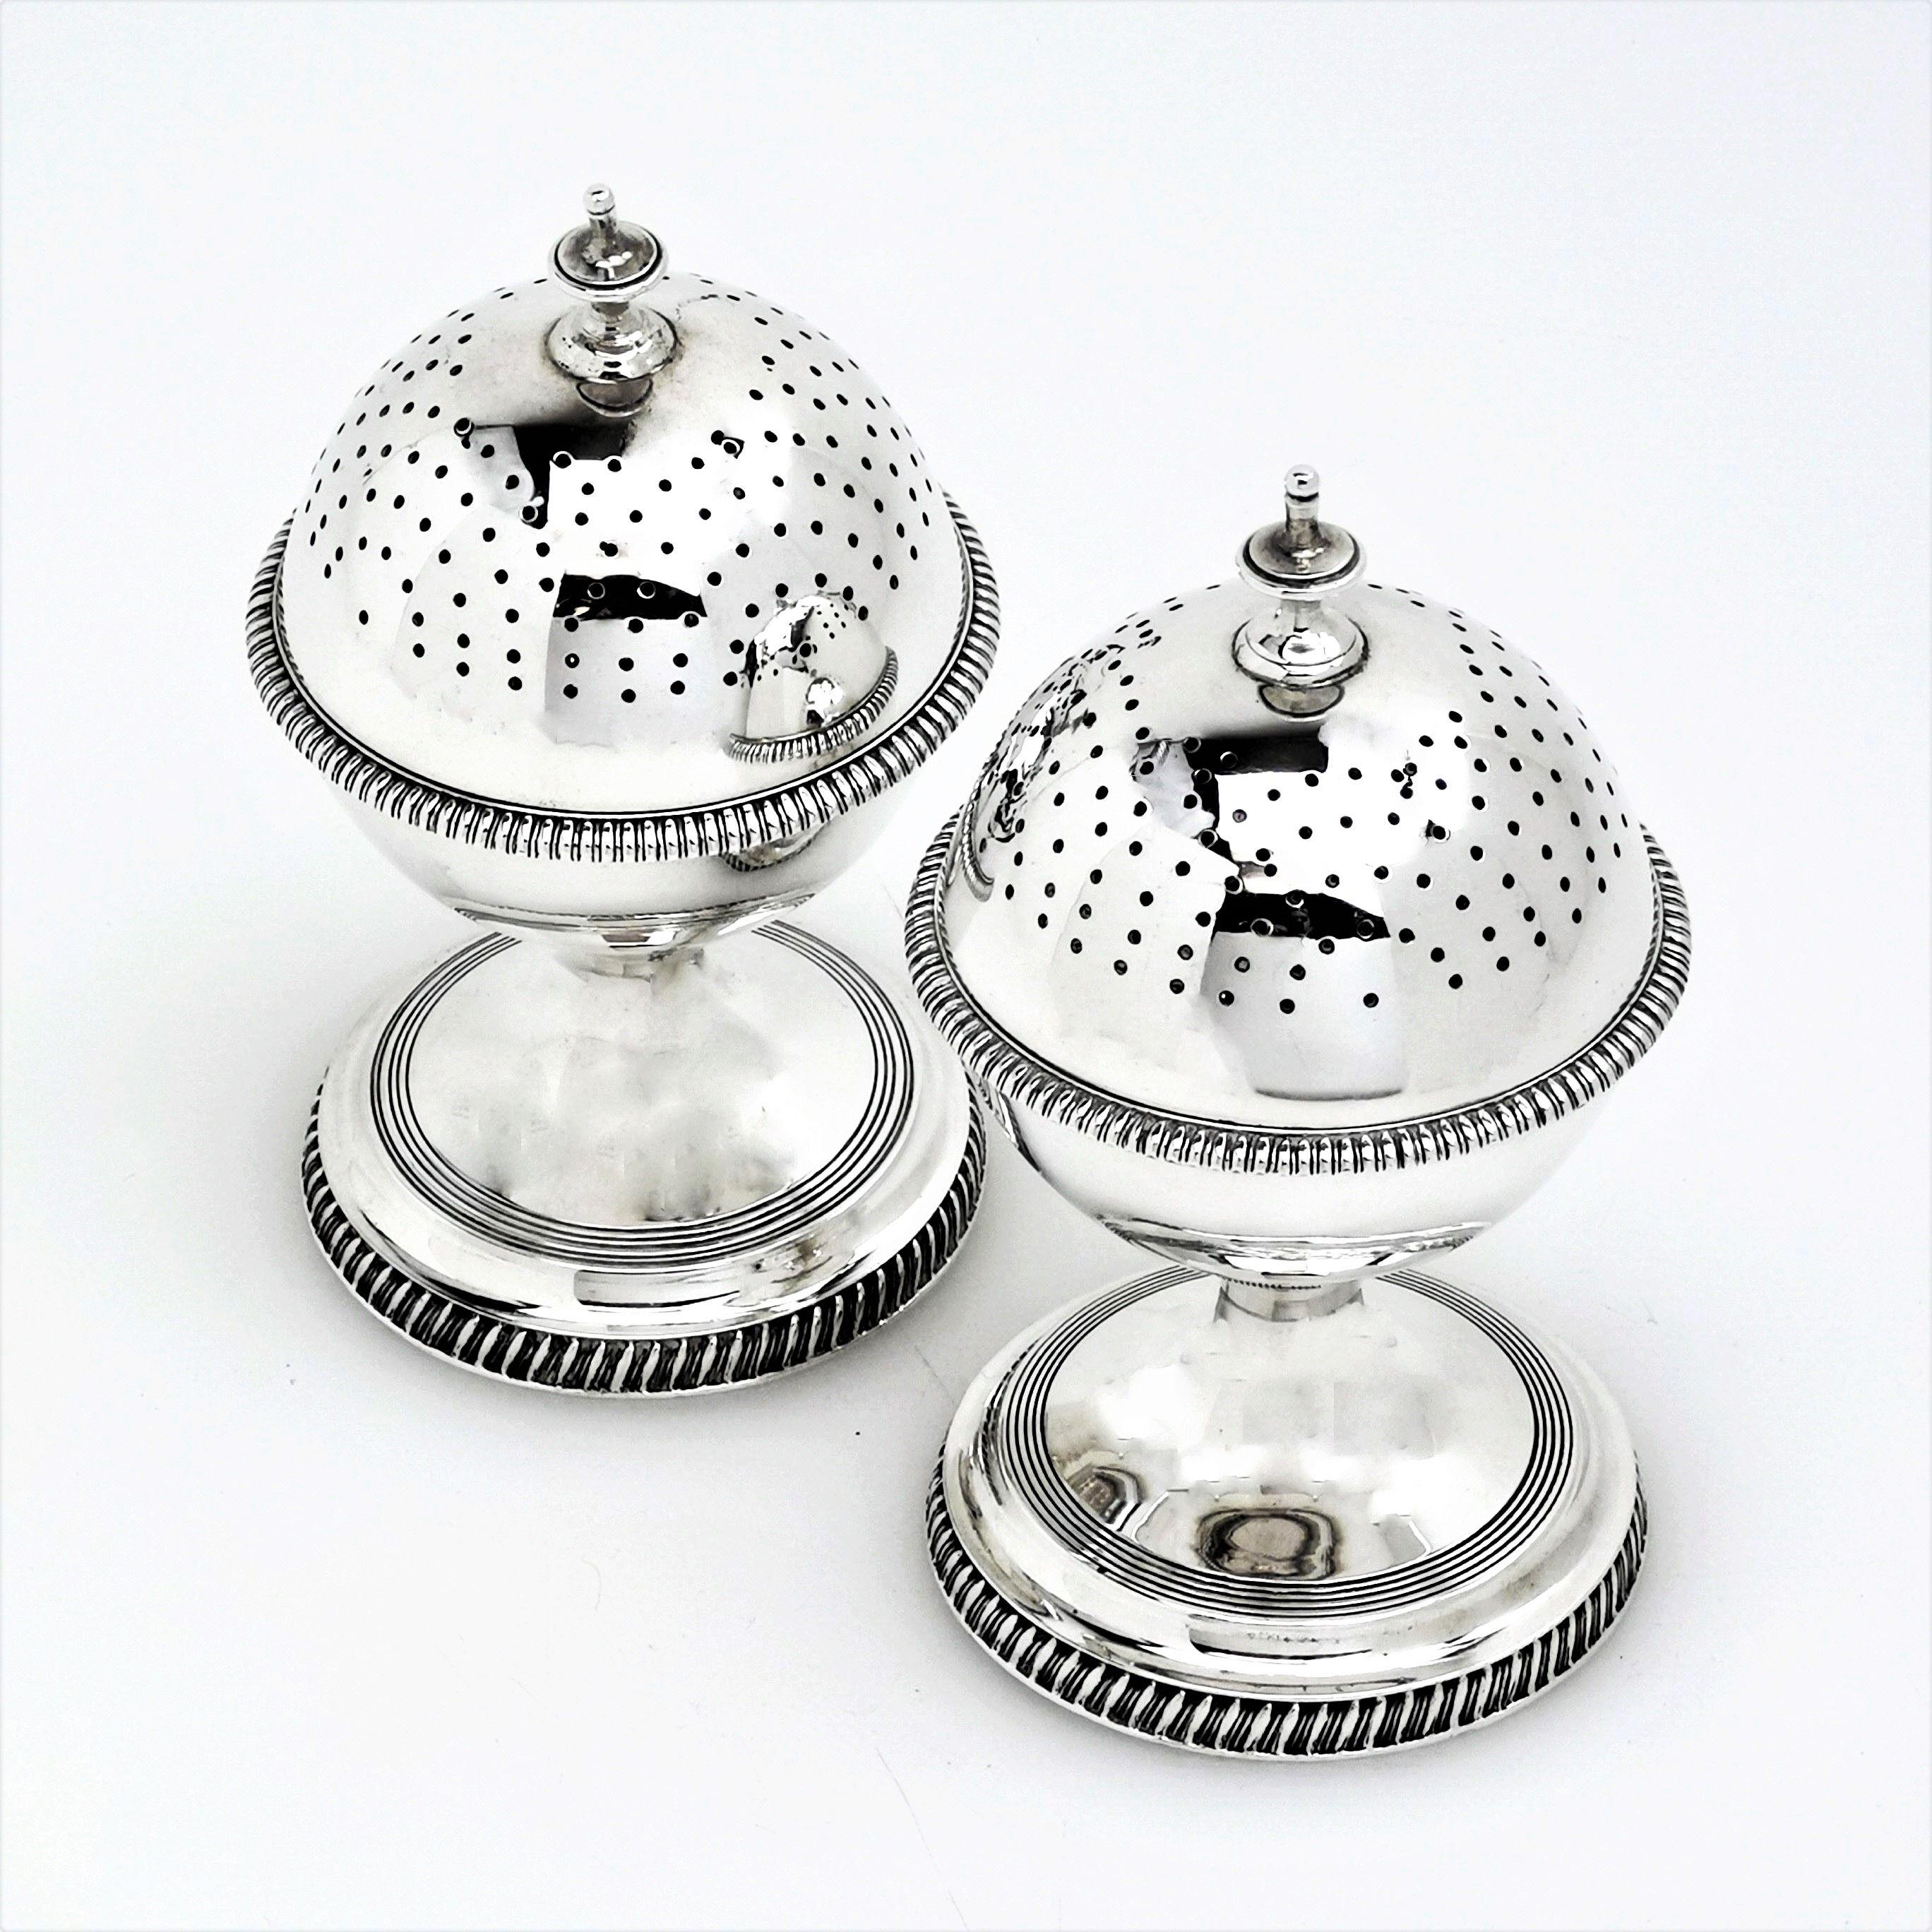 A pair of sterling Silver Georgian style globe shaped Peppers or Salt & Pepper Shakers each standing on a substantial spread pedestal foot. The Shakers each have a gadroon border around the feet and also on a girdle around the centre of the globe.